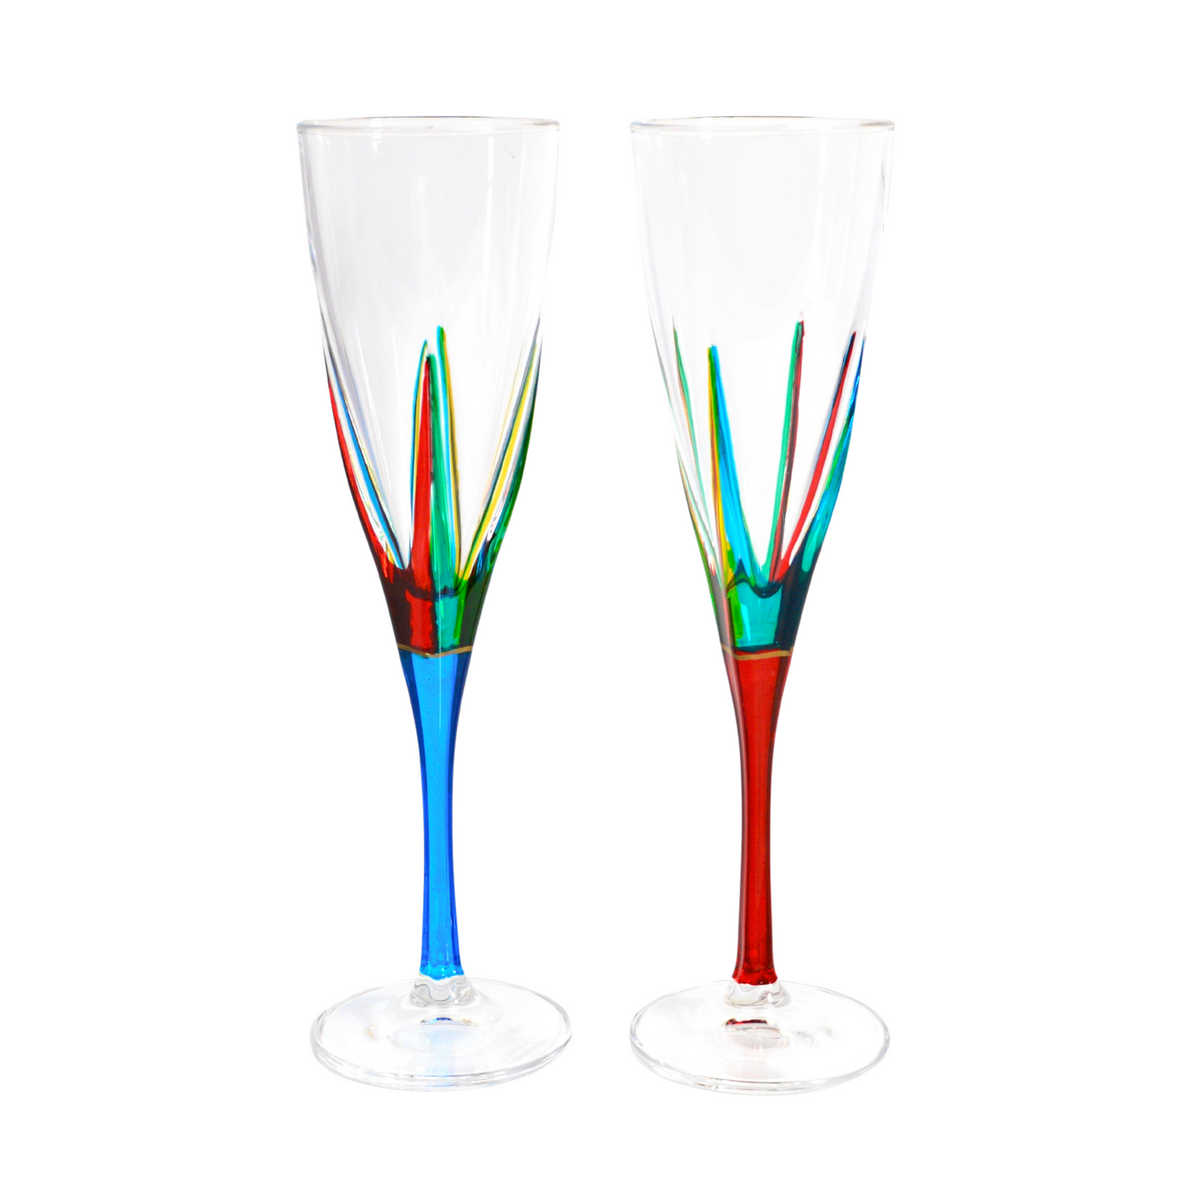 Fusion Champagne Flutes, Set of 2, Hand-Painted Italian Crystal Glasses - My Italian Decor